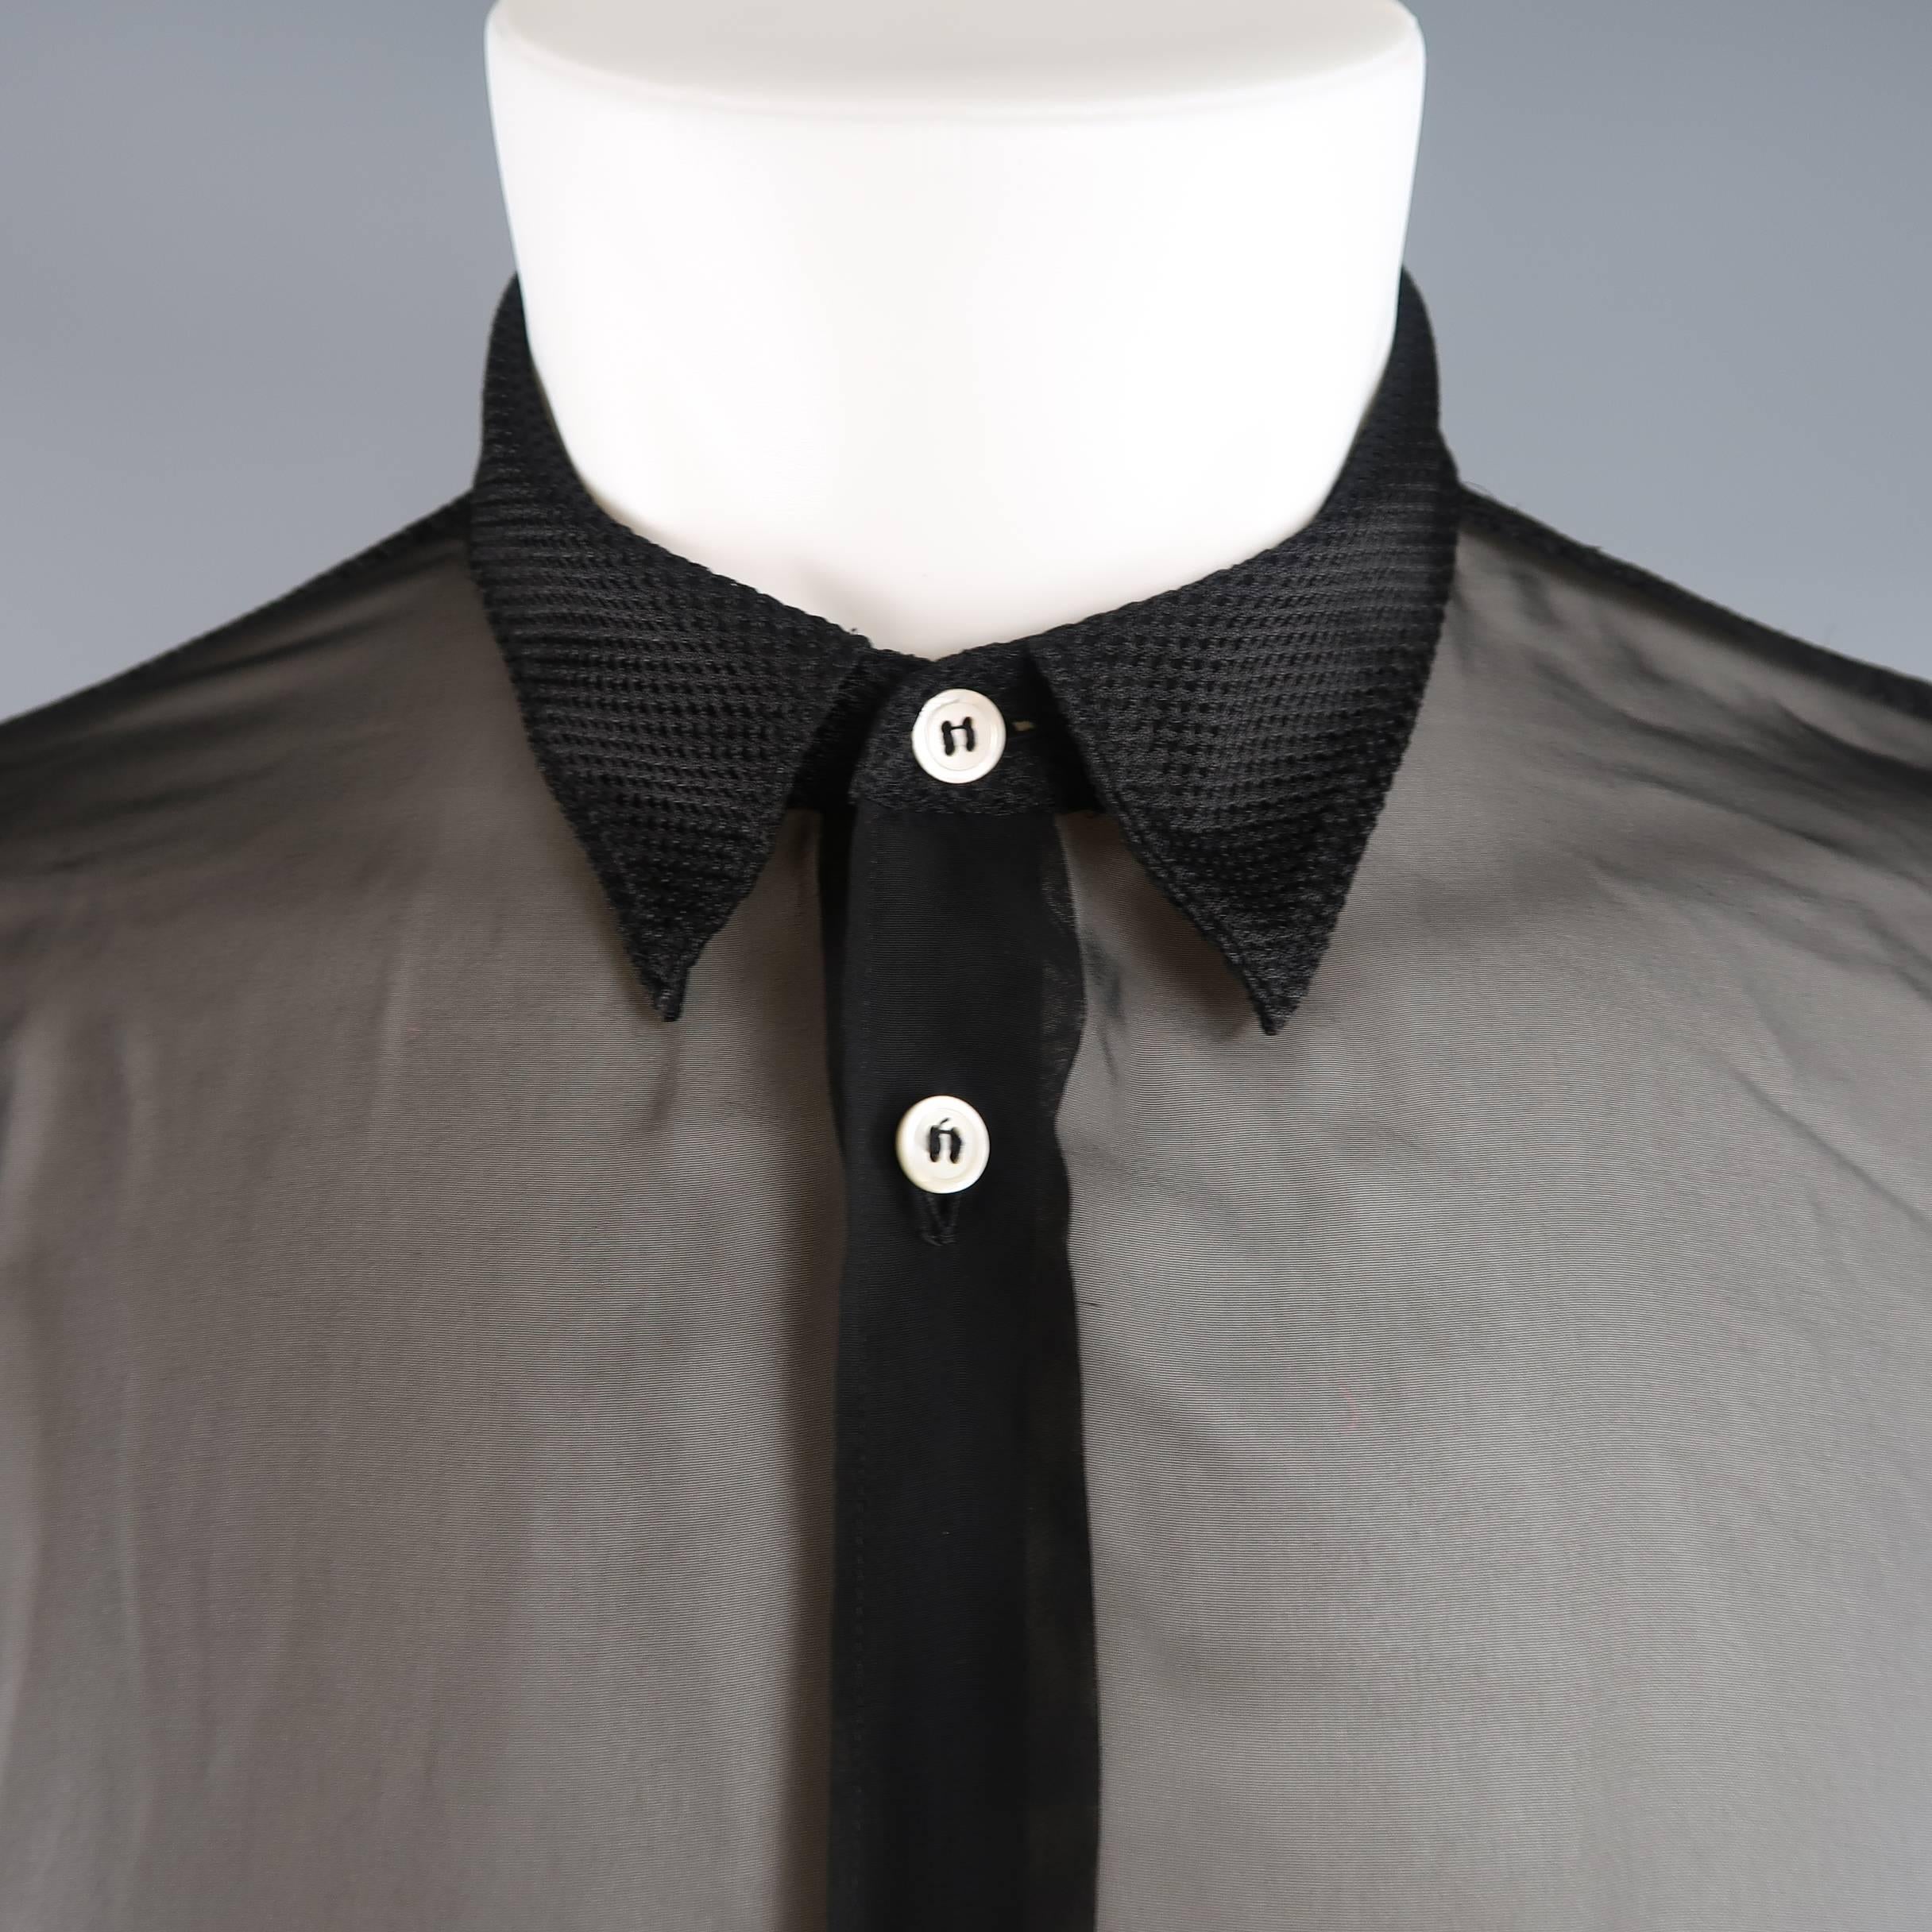 COMMES des GARCONS HOMME PLUS shirt features a sheer chiffon front with breast pocket, pointed mesh collar, striped mesh sleeves, and mesh back. Minor wear. Made in Japan.
 
Good Pre-Owned Condition.
Marked: M (AD 2013)
 
Measurements:
 
Shoulder: